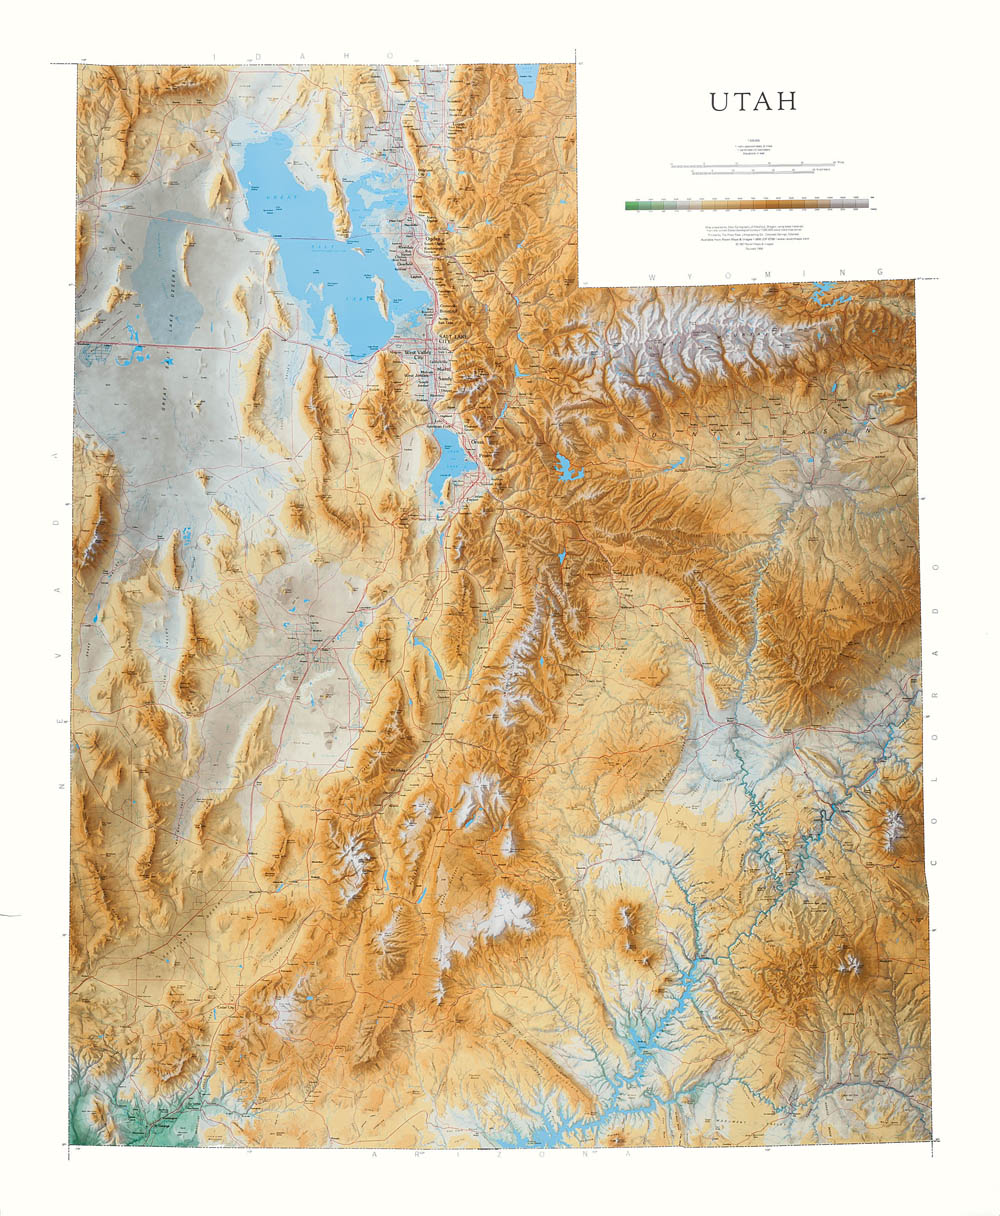 Utah Topographical Wall Map By Raven Maps, 50" X 41"